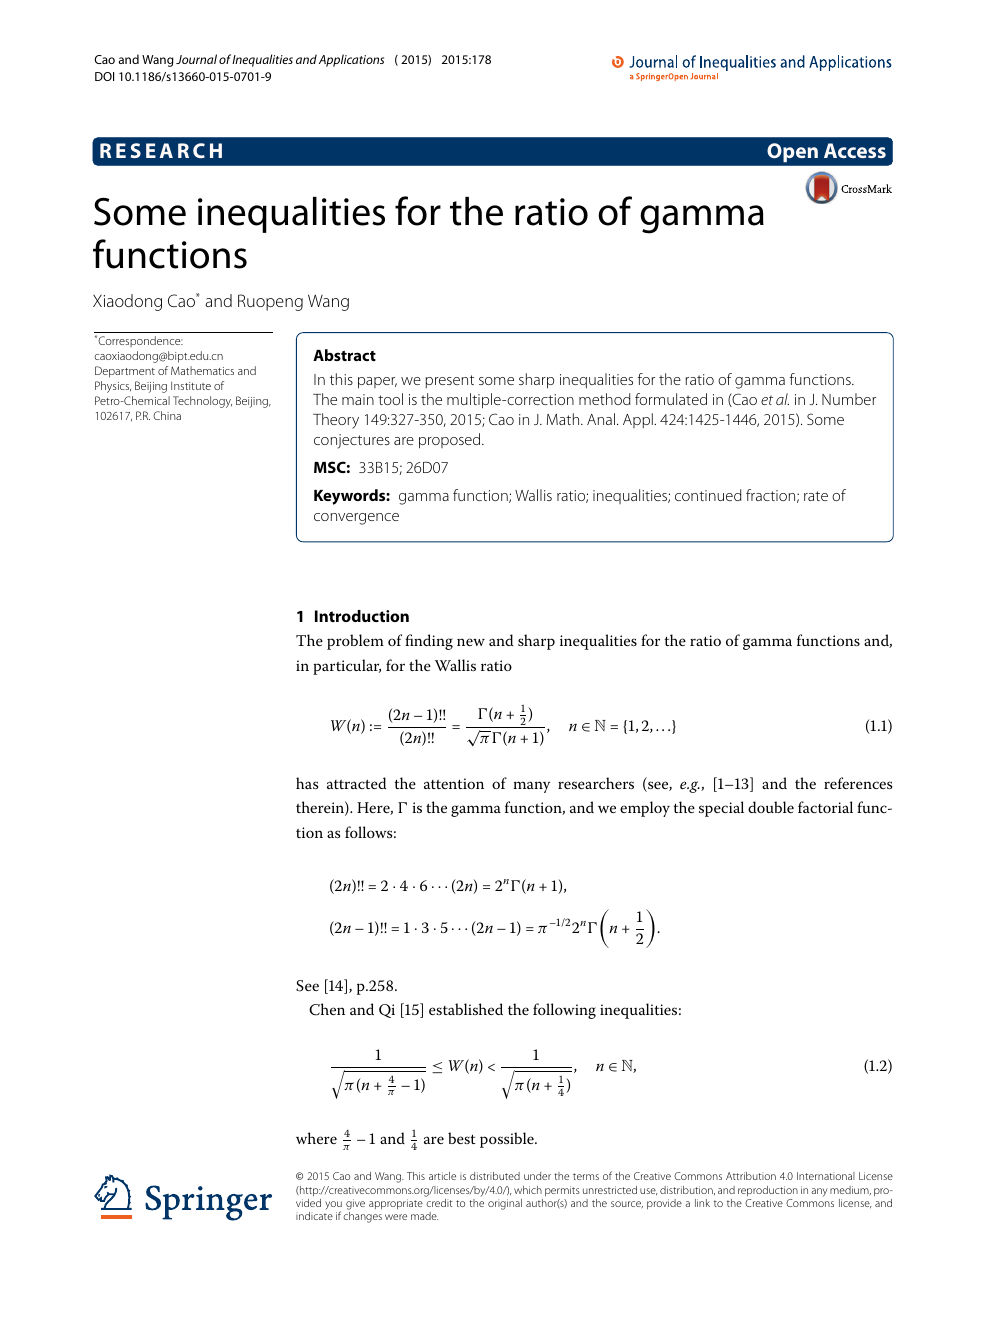 Some Inequalities For The Ratio Of Gamma Functions Topic Of Research Paper In Mathematics Download Scholarly Article Pdf And Read For Free On Cyberleninka Open Science Hub